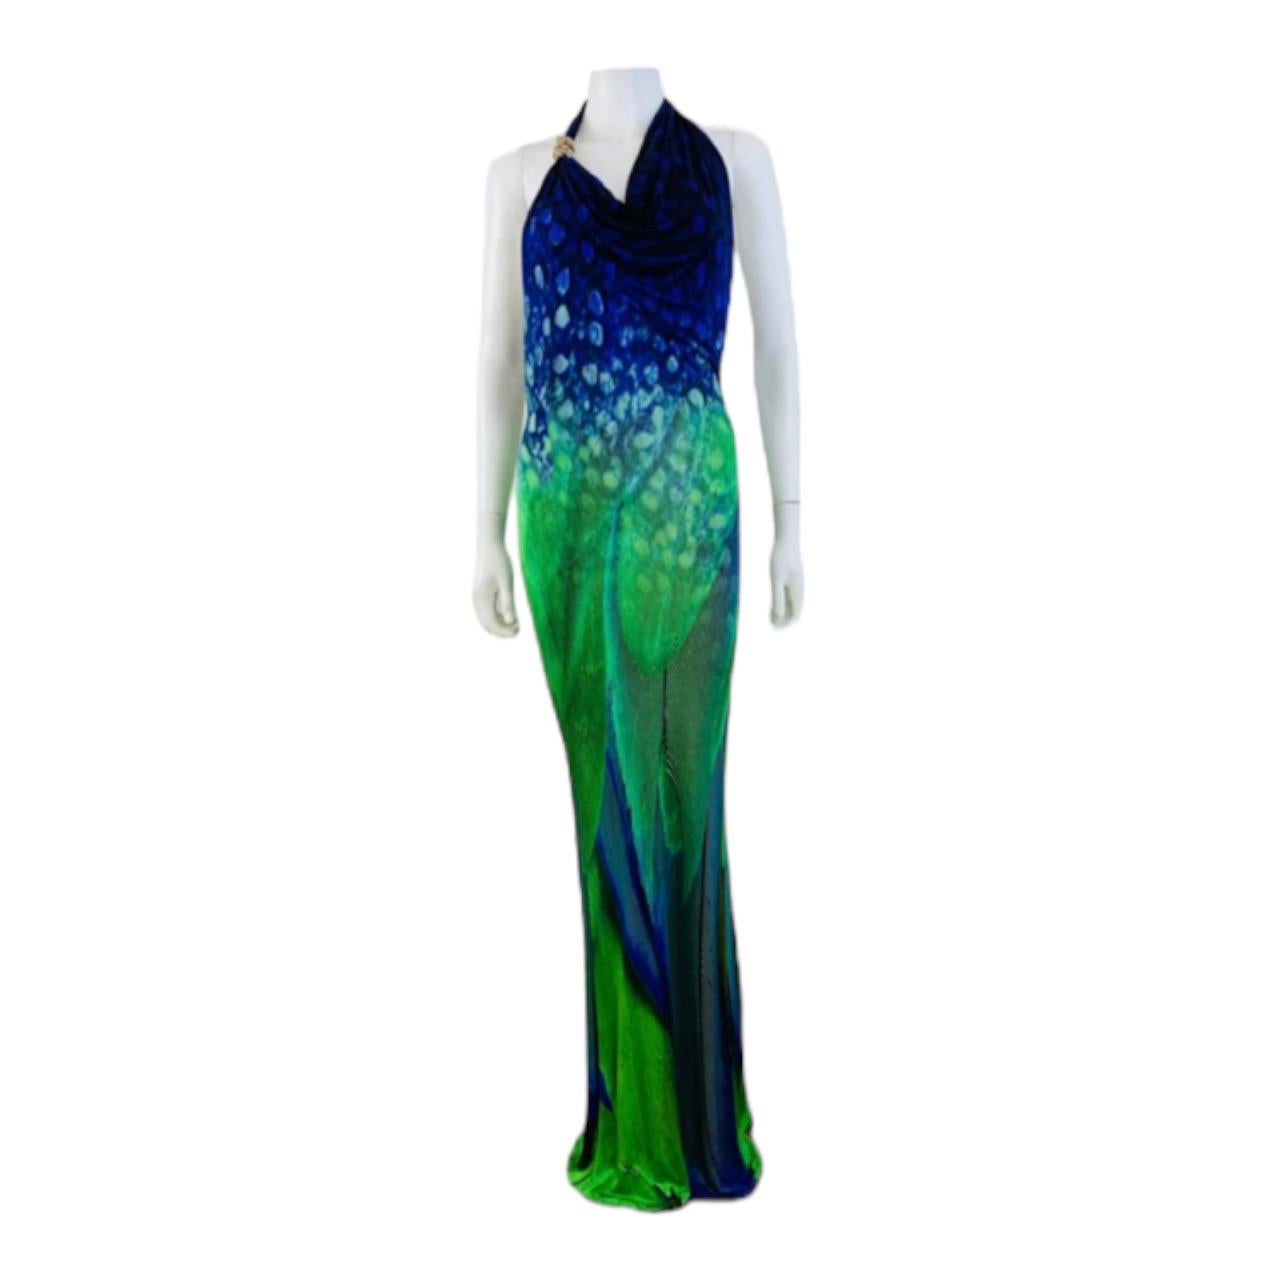 Stunning Roberto Cavalli Dress
Incredible + bold oversized peacock feather print
Green + purple colors meld together for an ombre effect
Halter neckline with gold accent snake brooch
Draped neckline
Built in elastic bottom bra
Fitted wiggle